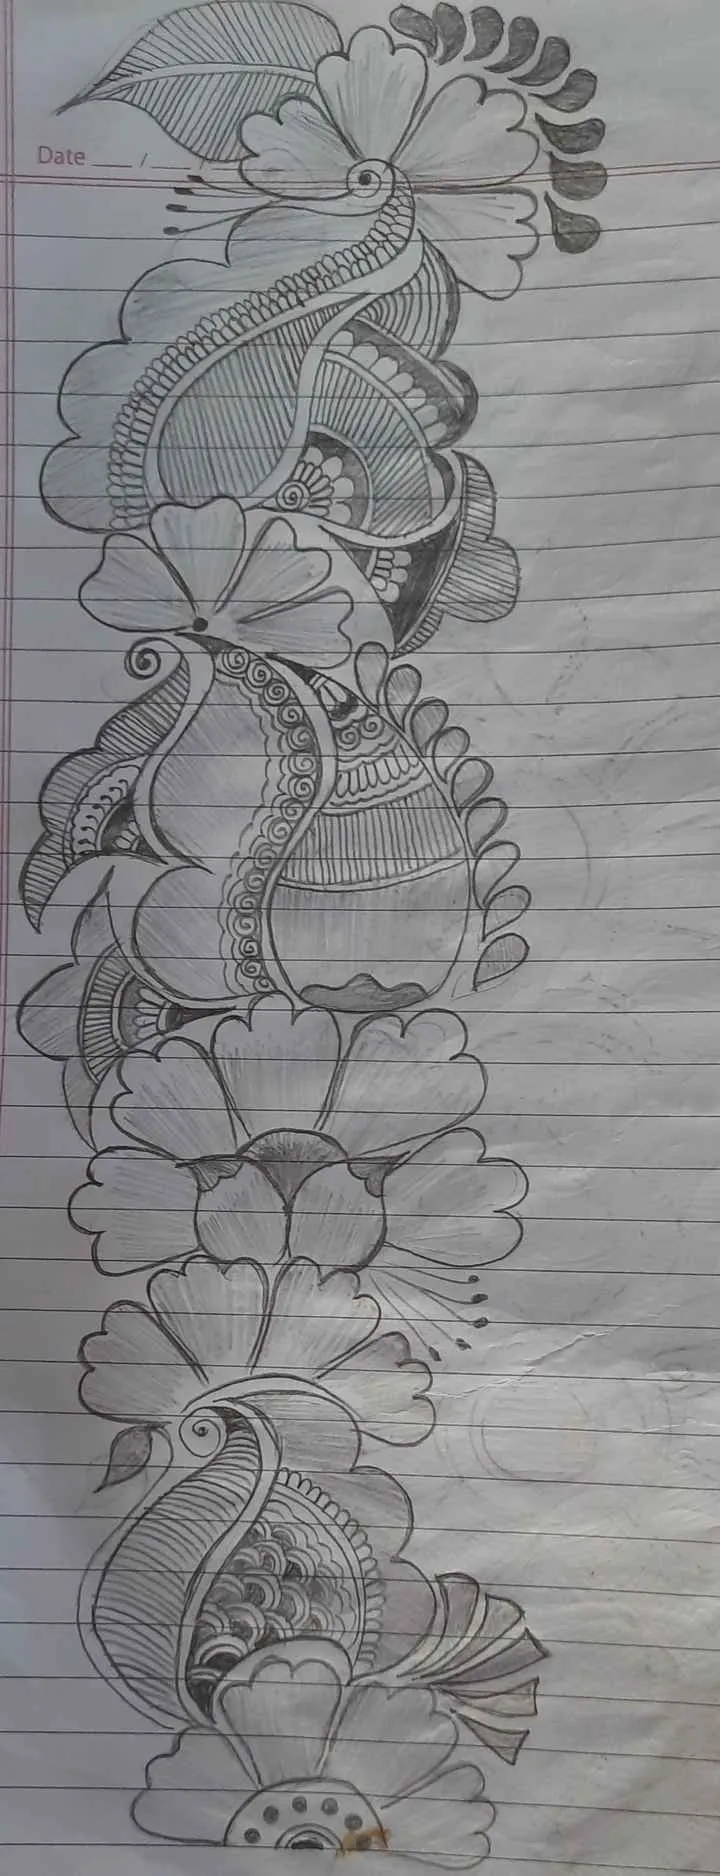 Heena Art by Pencil for practice  Draw Easy mehdi sketch on paper   YouTube